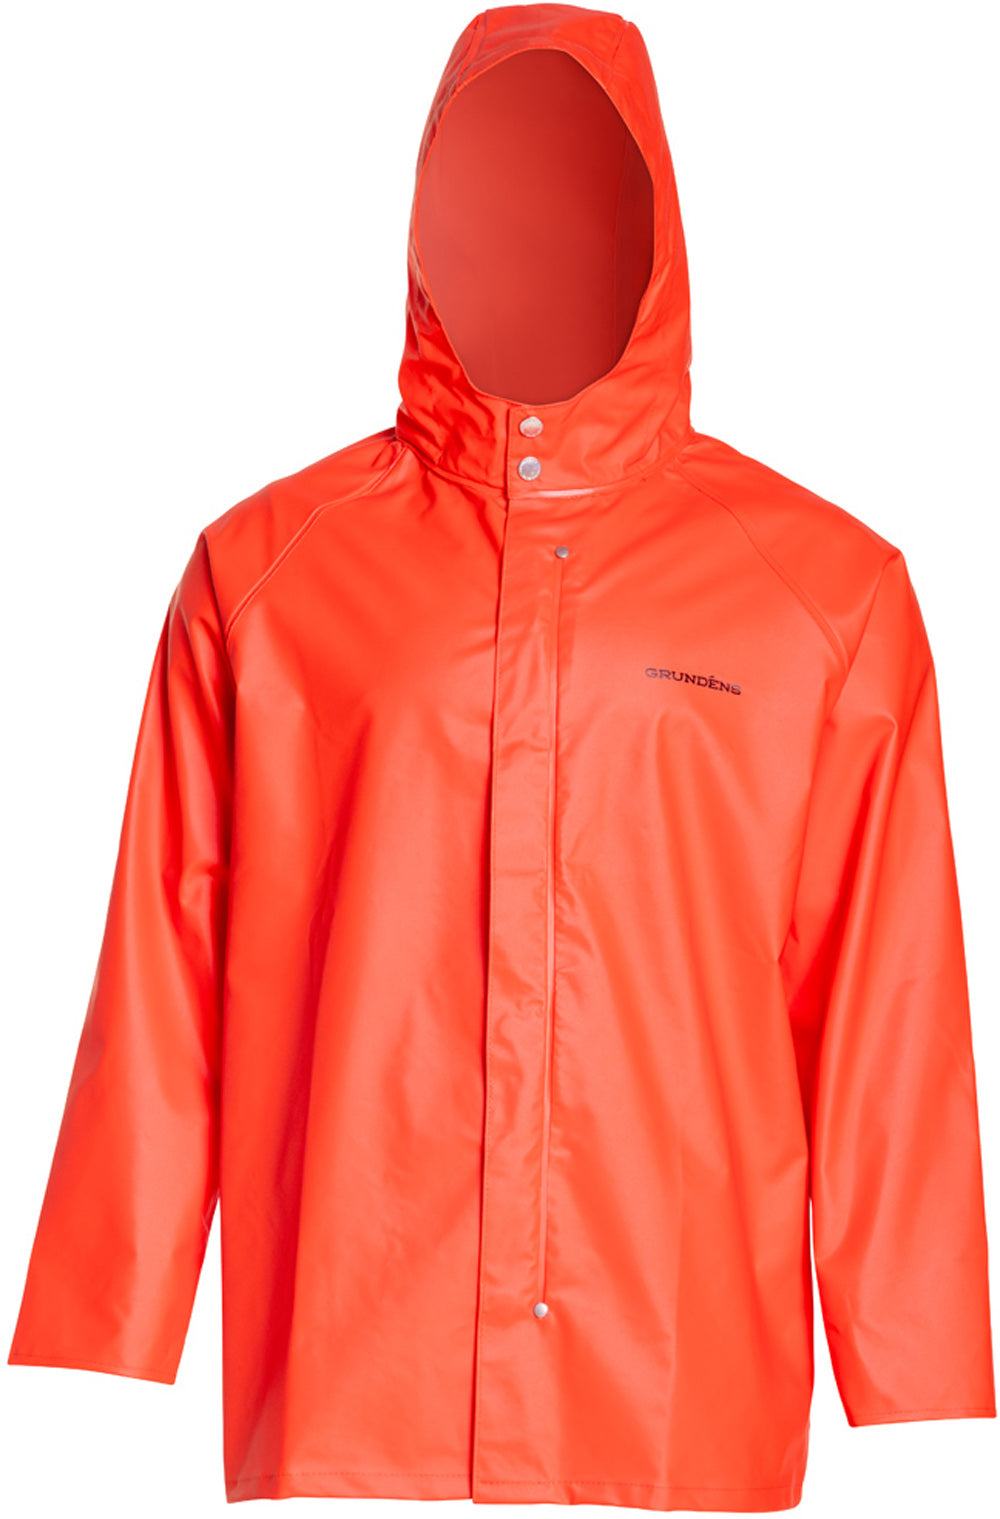 Shoreman Jacket in Orange color from the front view